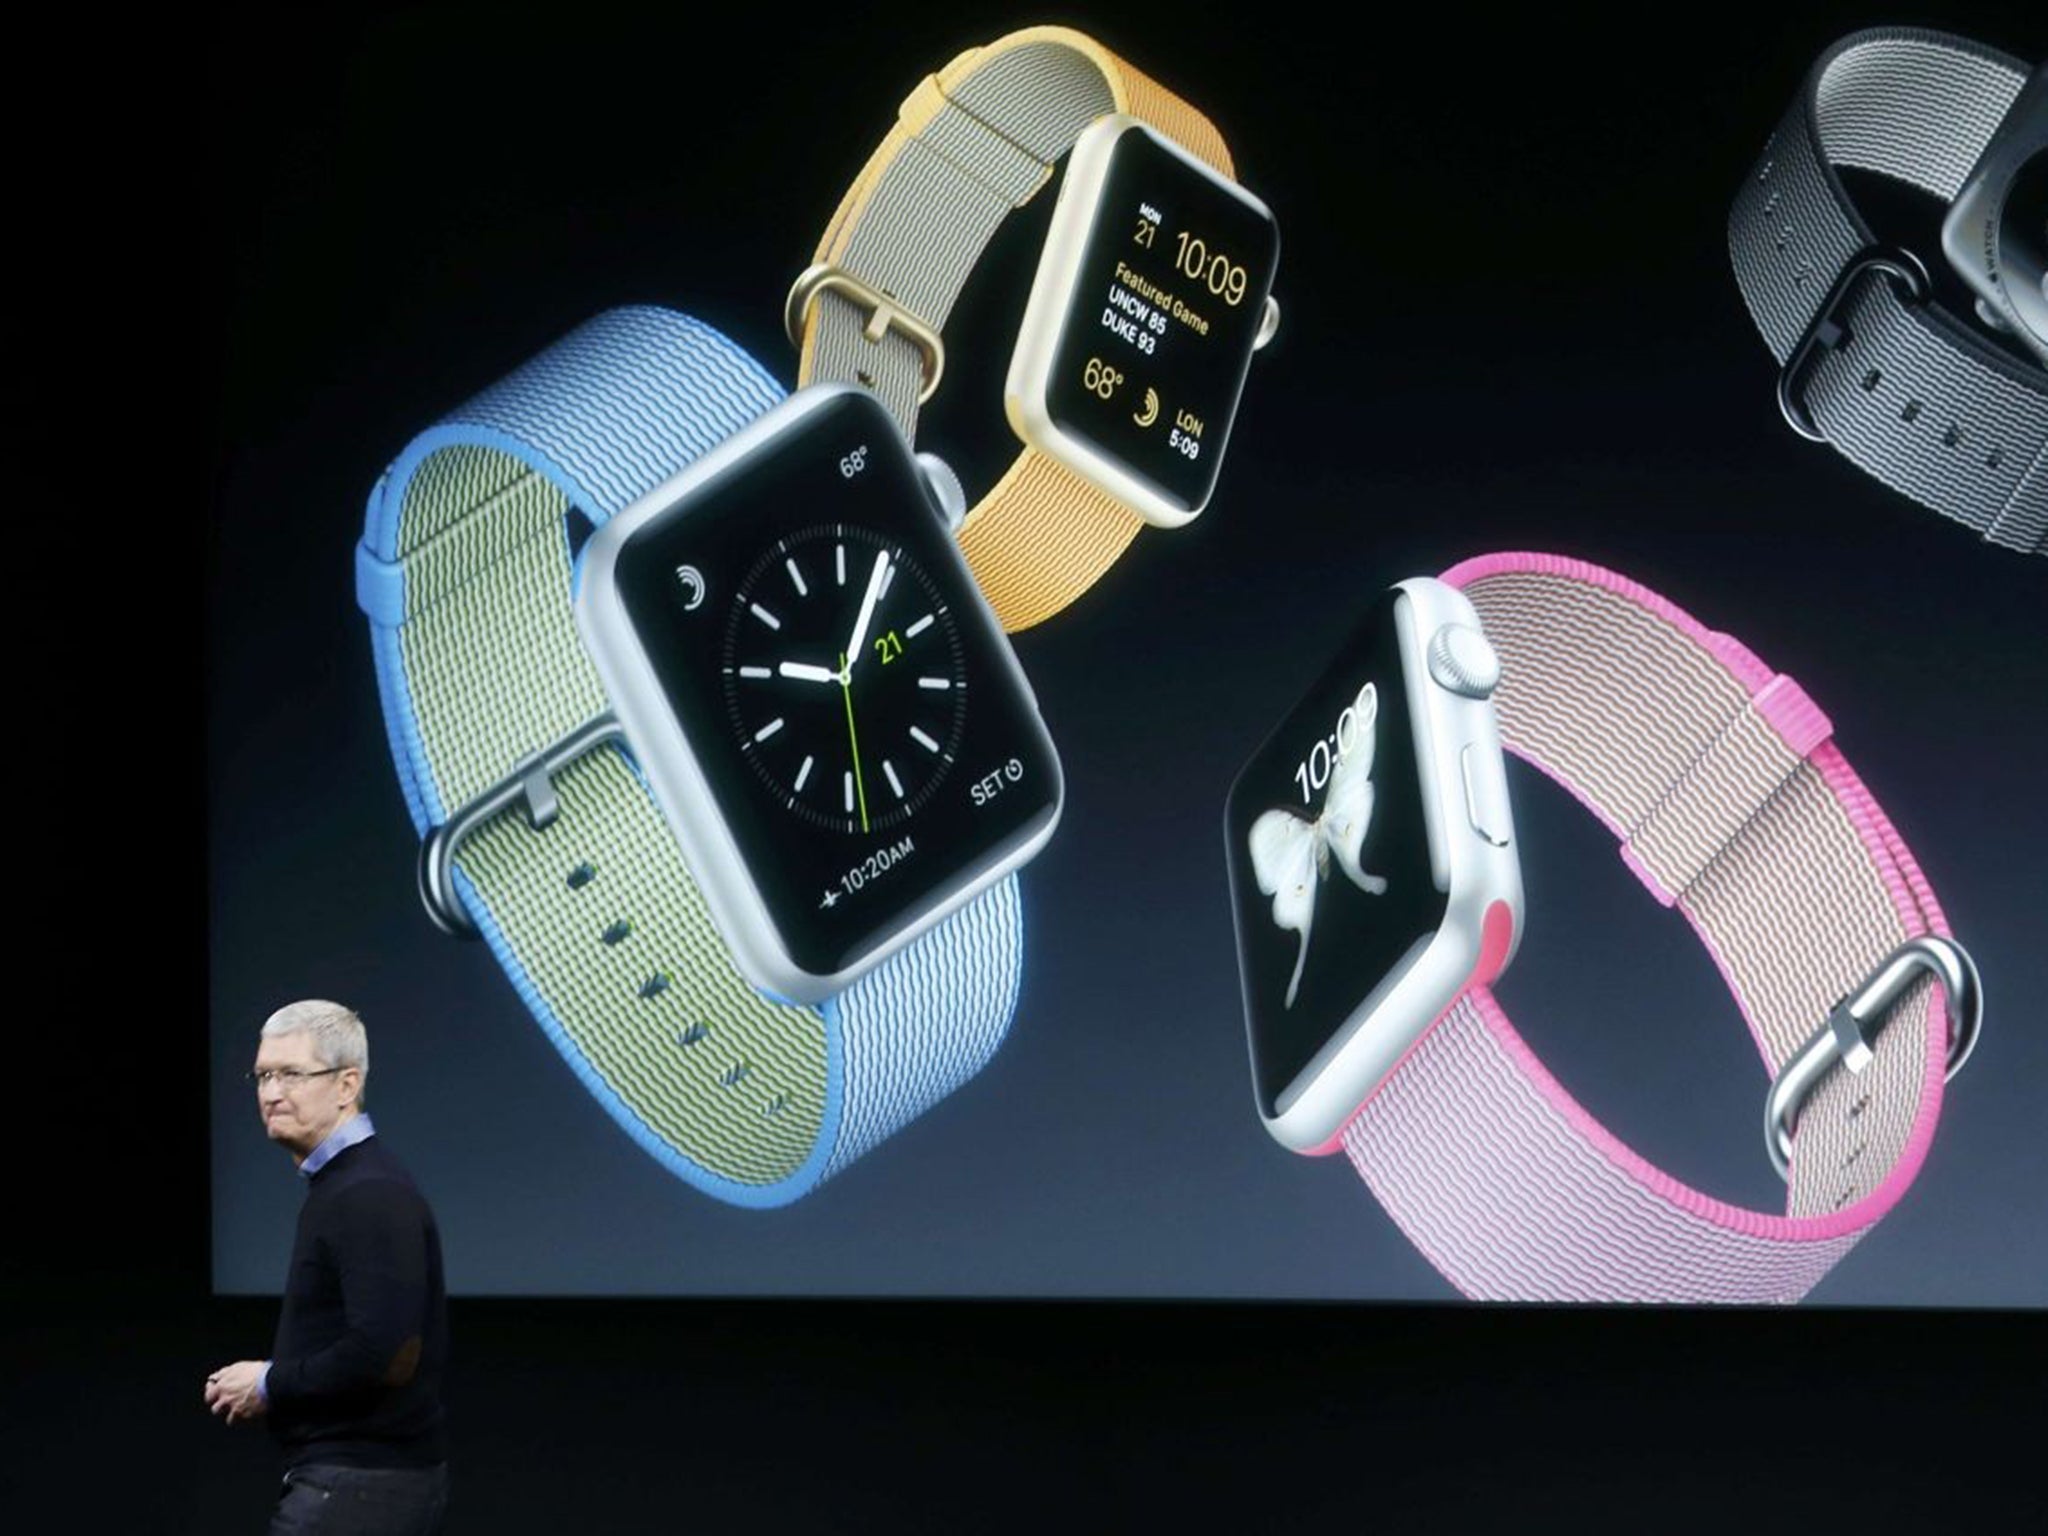 Apple’s chief Tim Cook launched the iWatch to great fanfare, but time has not been kind to it